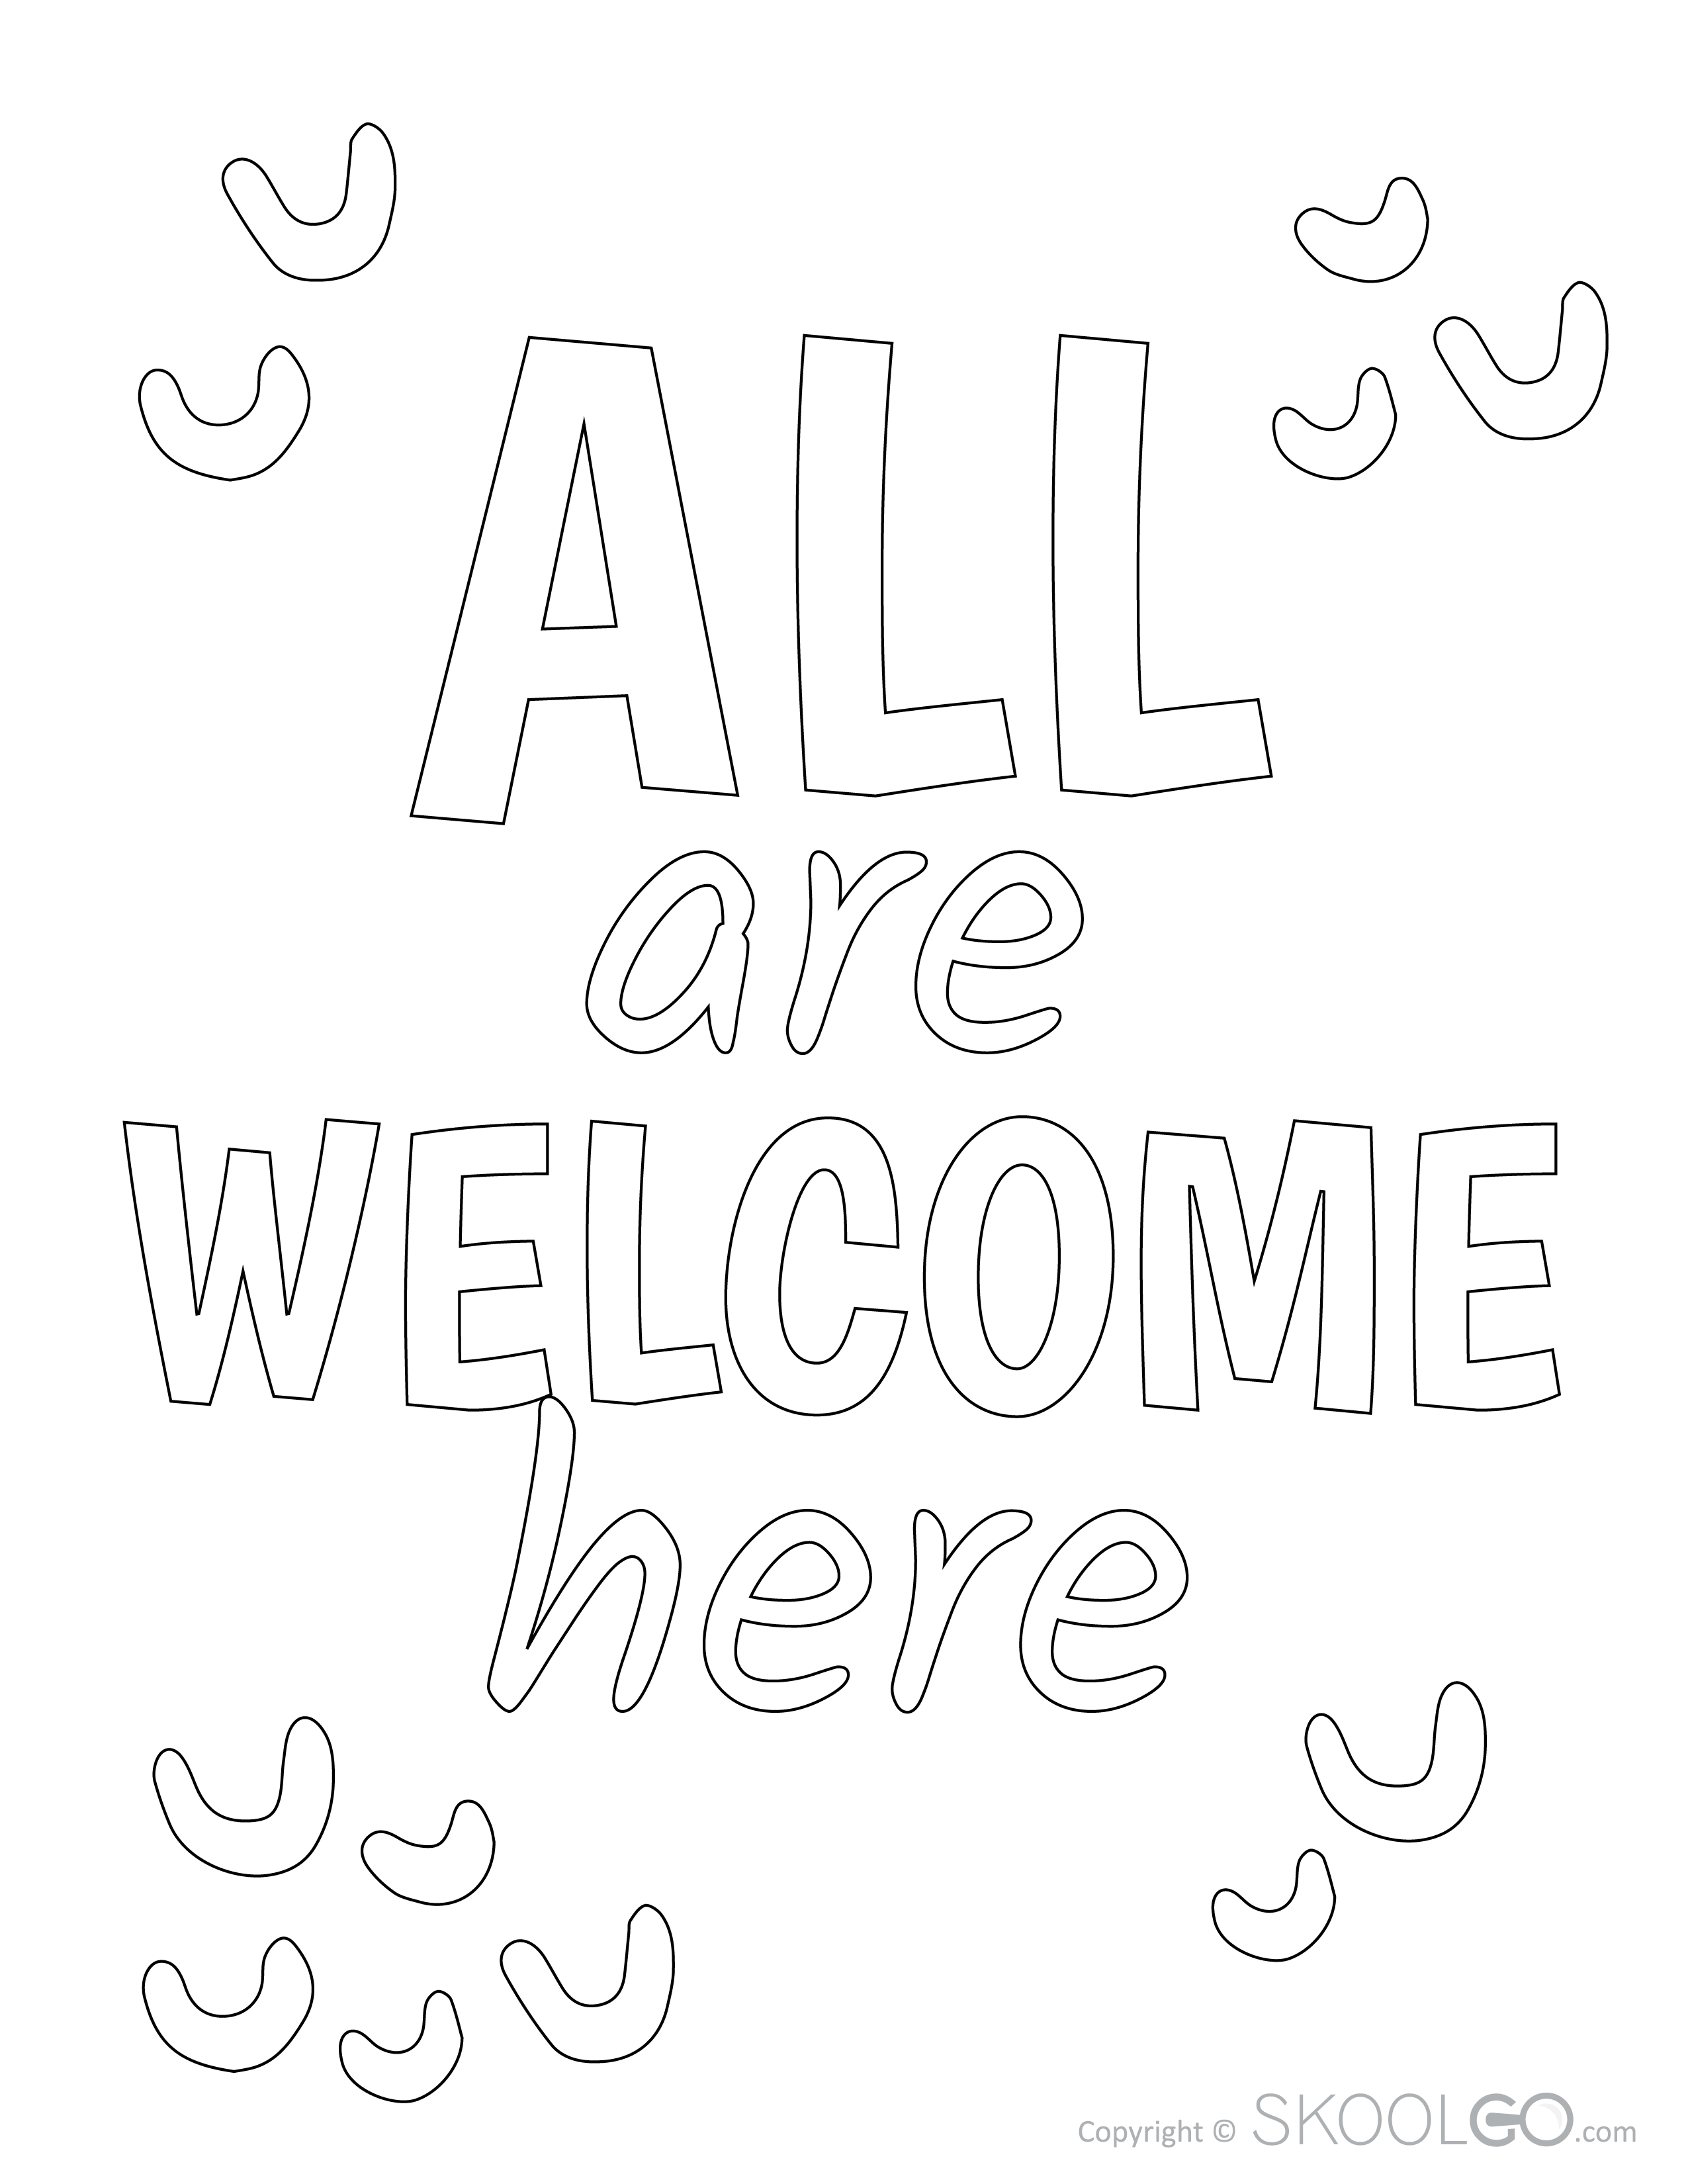 All Are Welcome Here - Free Coloring Version Poster